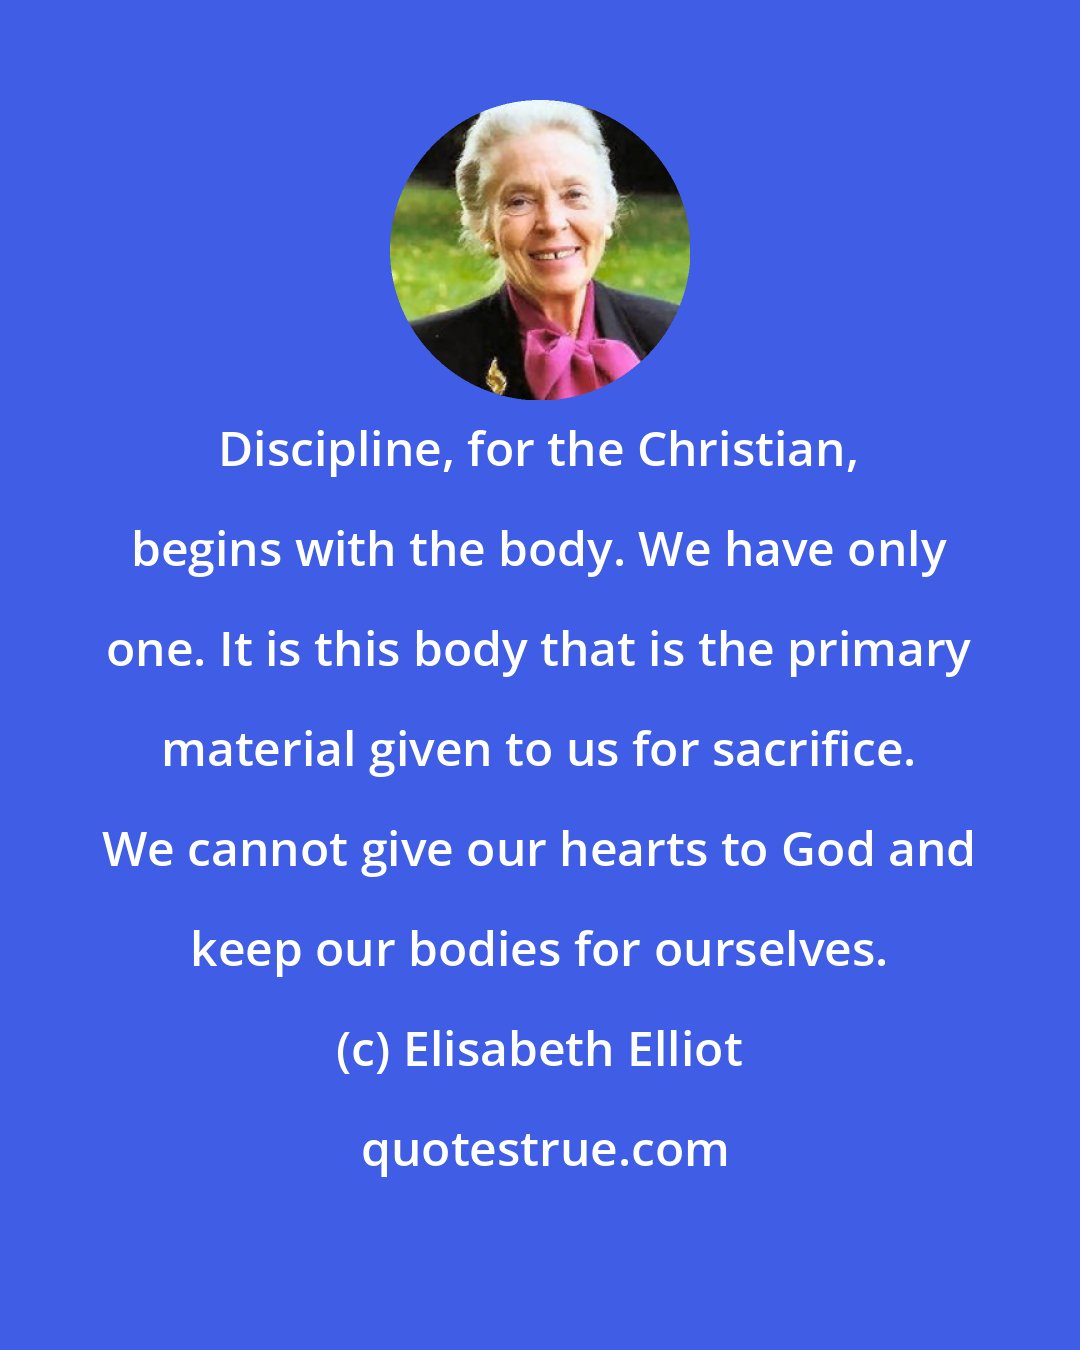 Elisabeth Elliot: Discipline, for the Christian, begins with the body. We have only one. It is this body that is the primary material given to us for sacrifice. We cannot give our hearts to God and keep our bodies for ourselves.